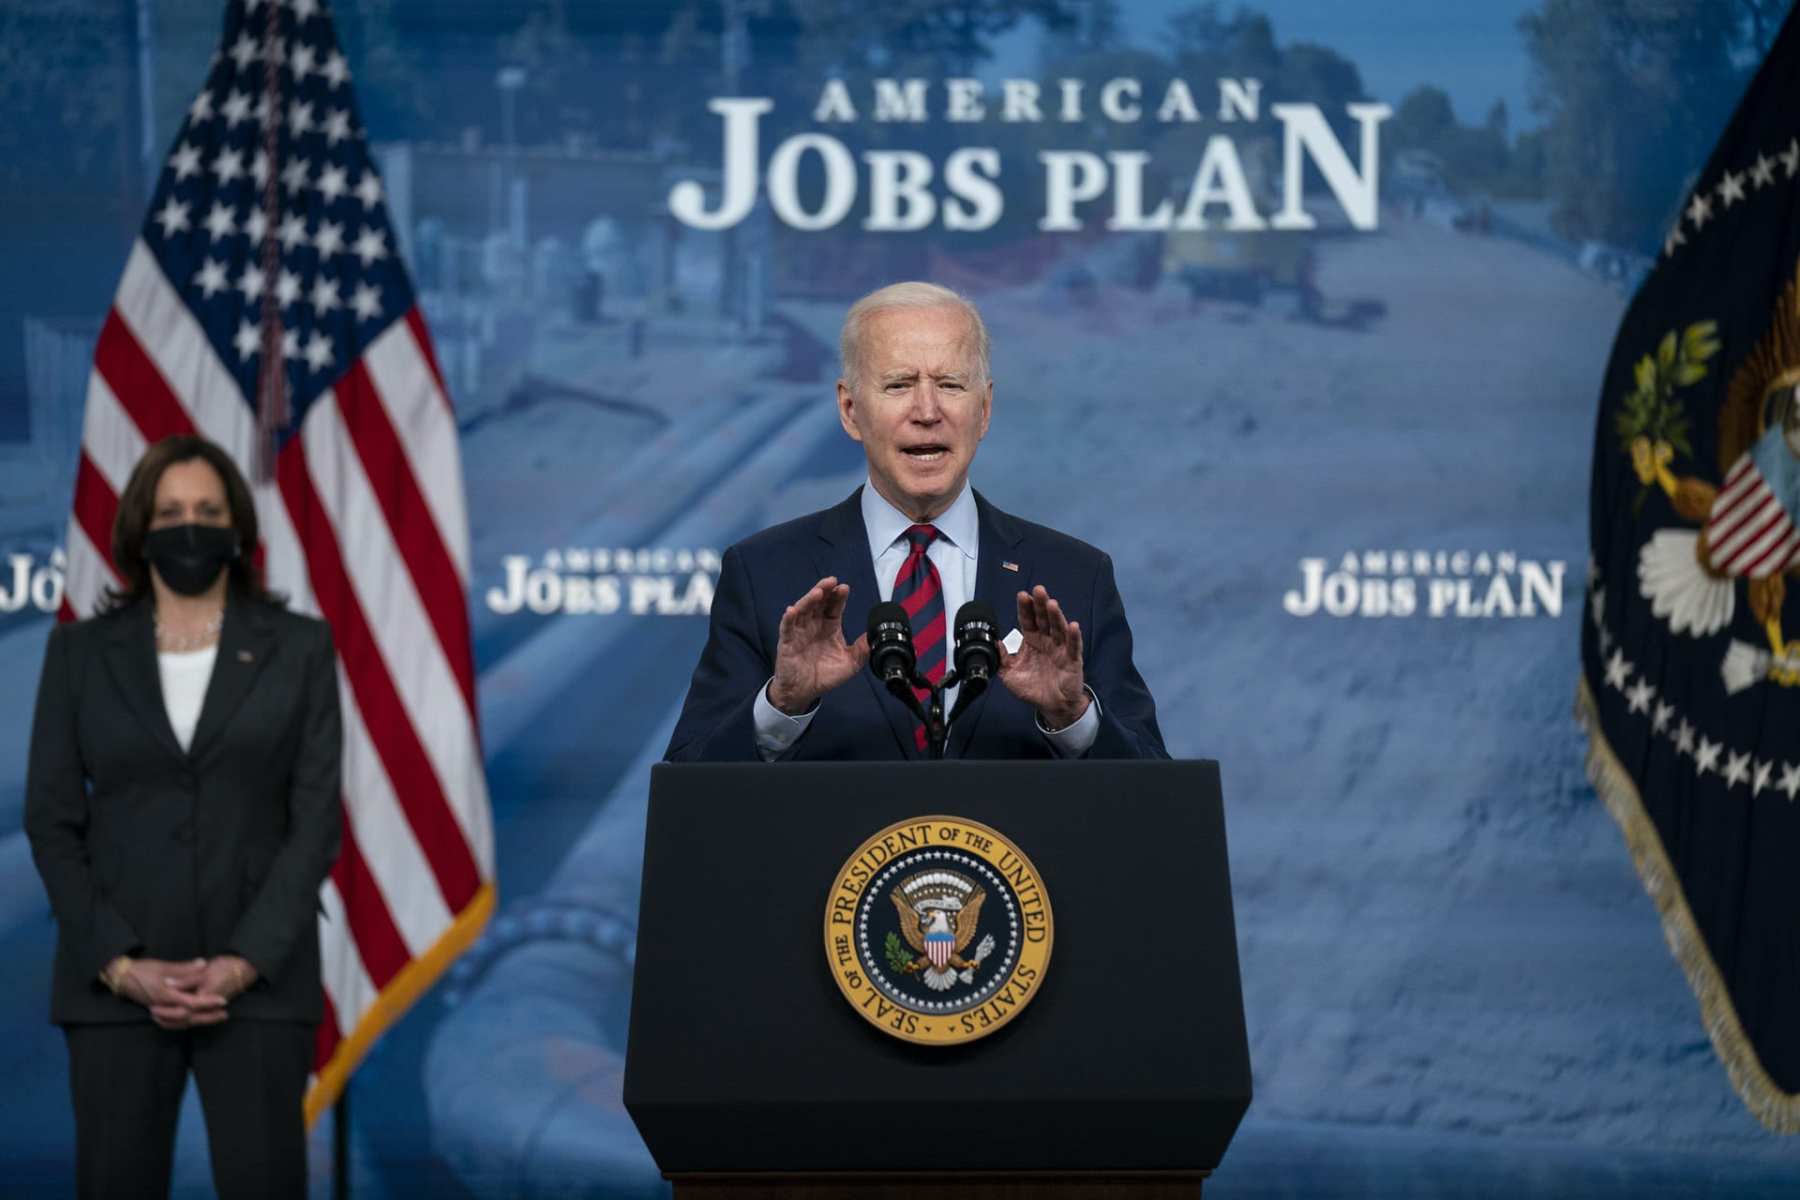 Joe Biden speaking at a podium in front of a backdrop that reads 